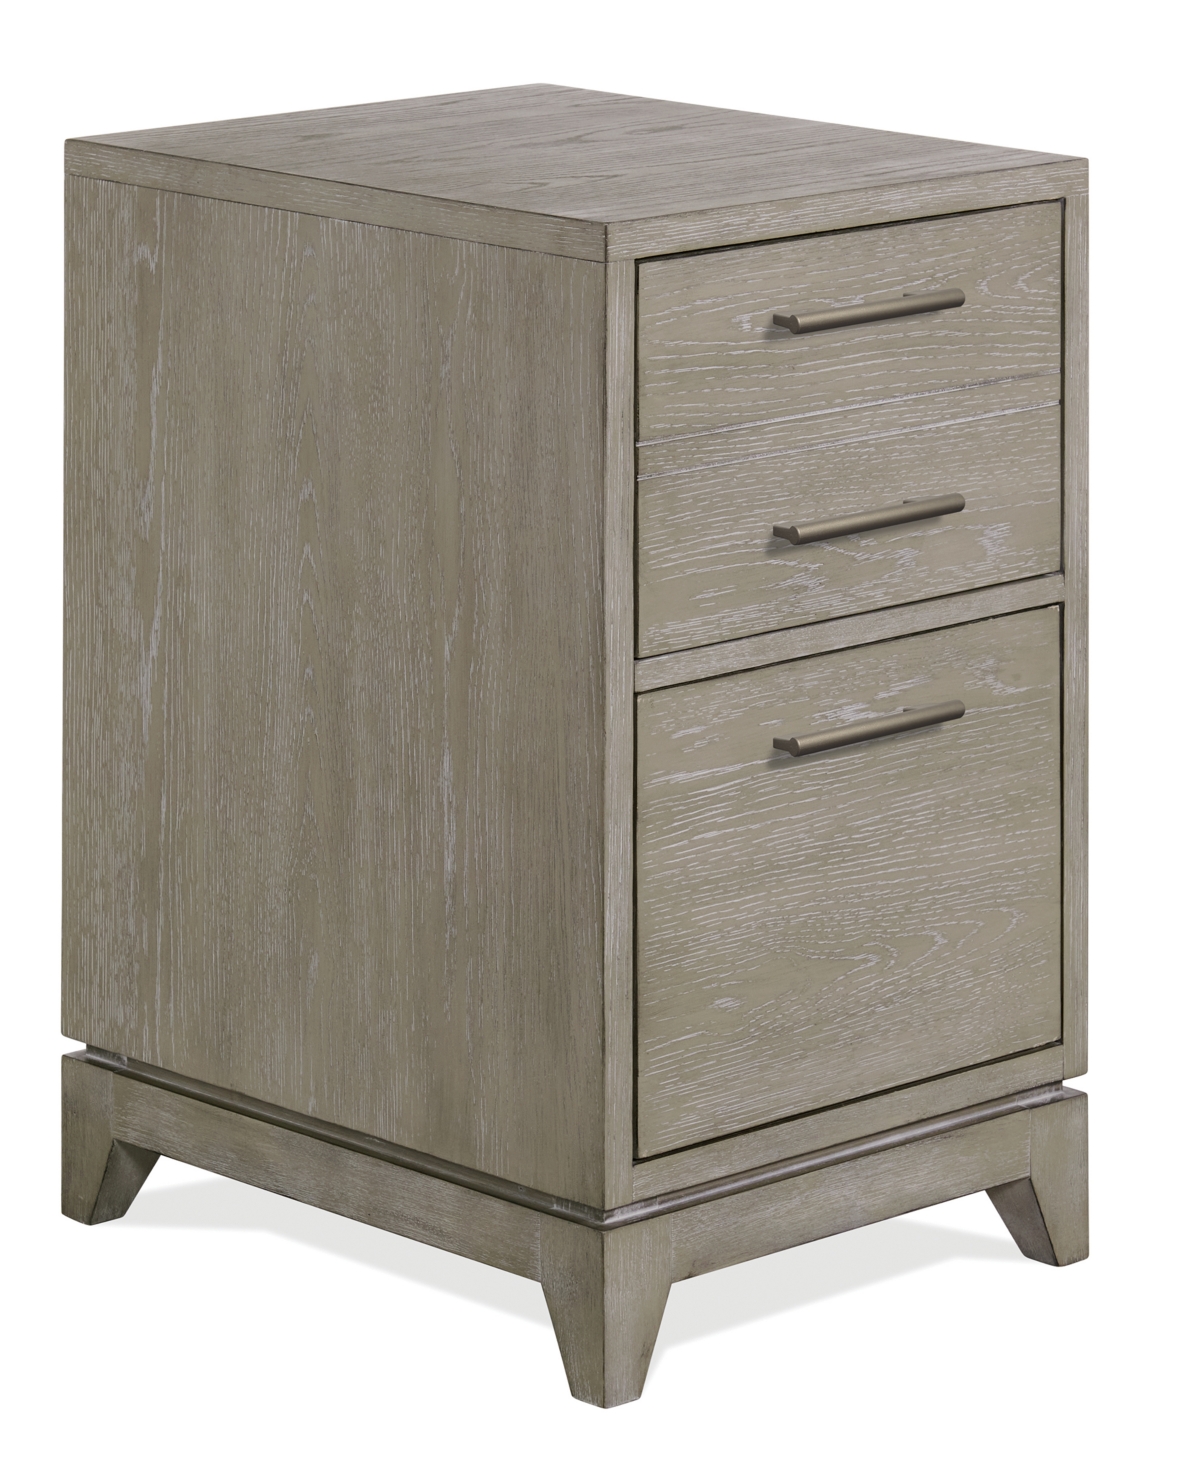 Furniture Rafferty 30" Wood Dovetail Joinery File Cabinet In Pavestone